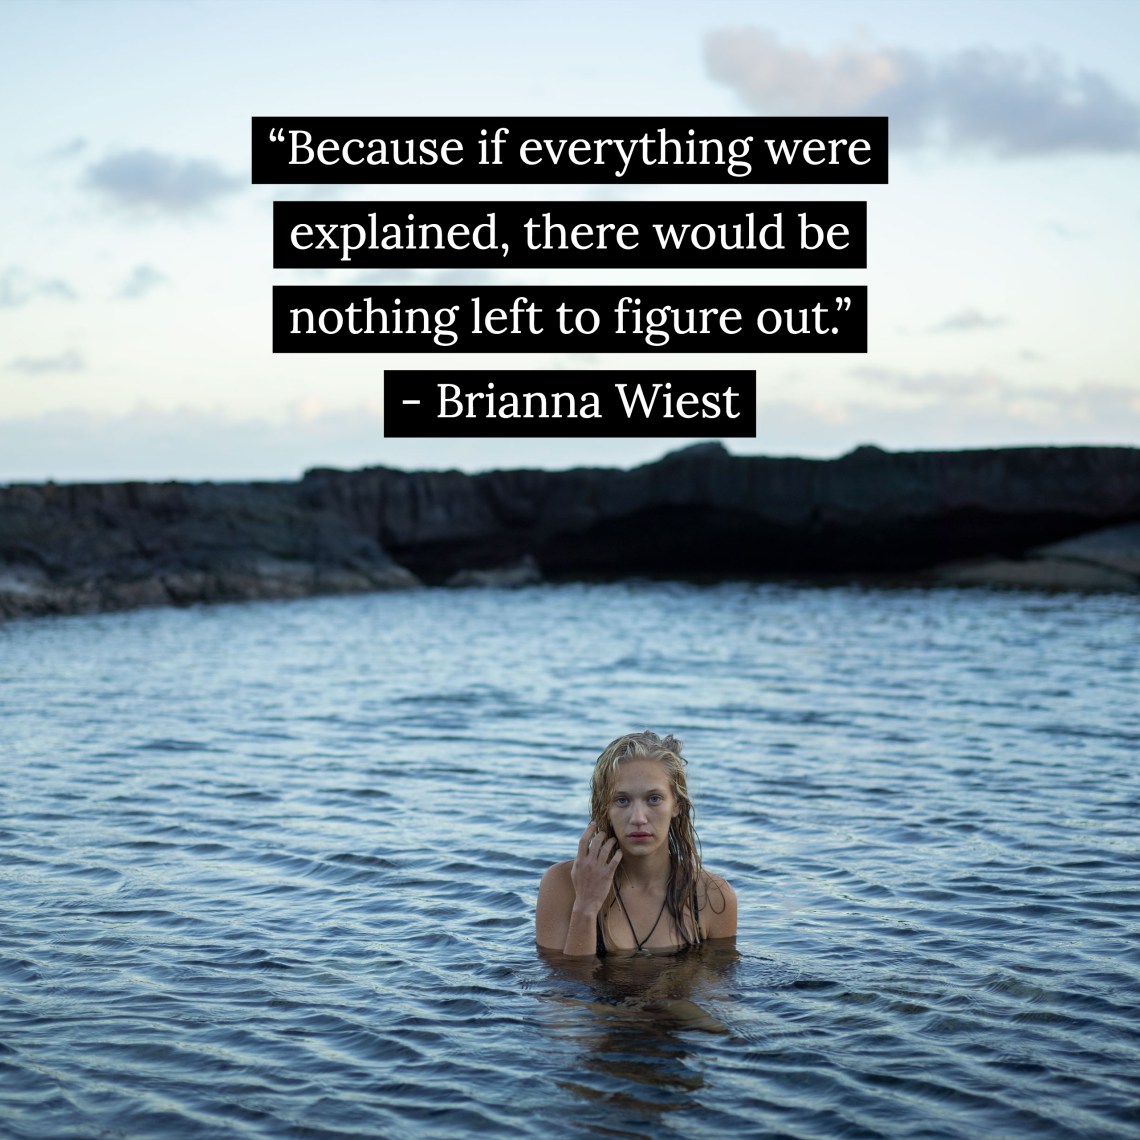 Quote from Brianna Wiest